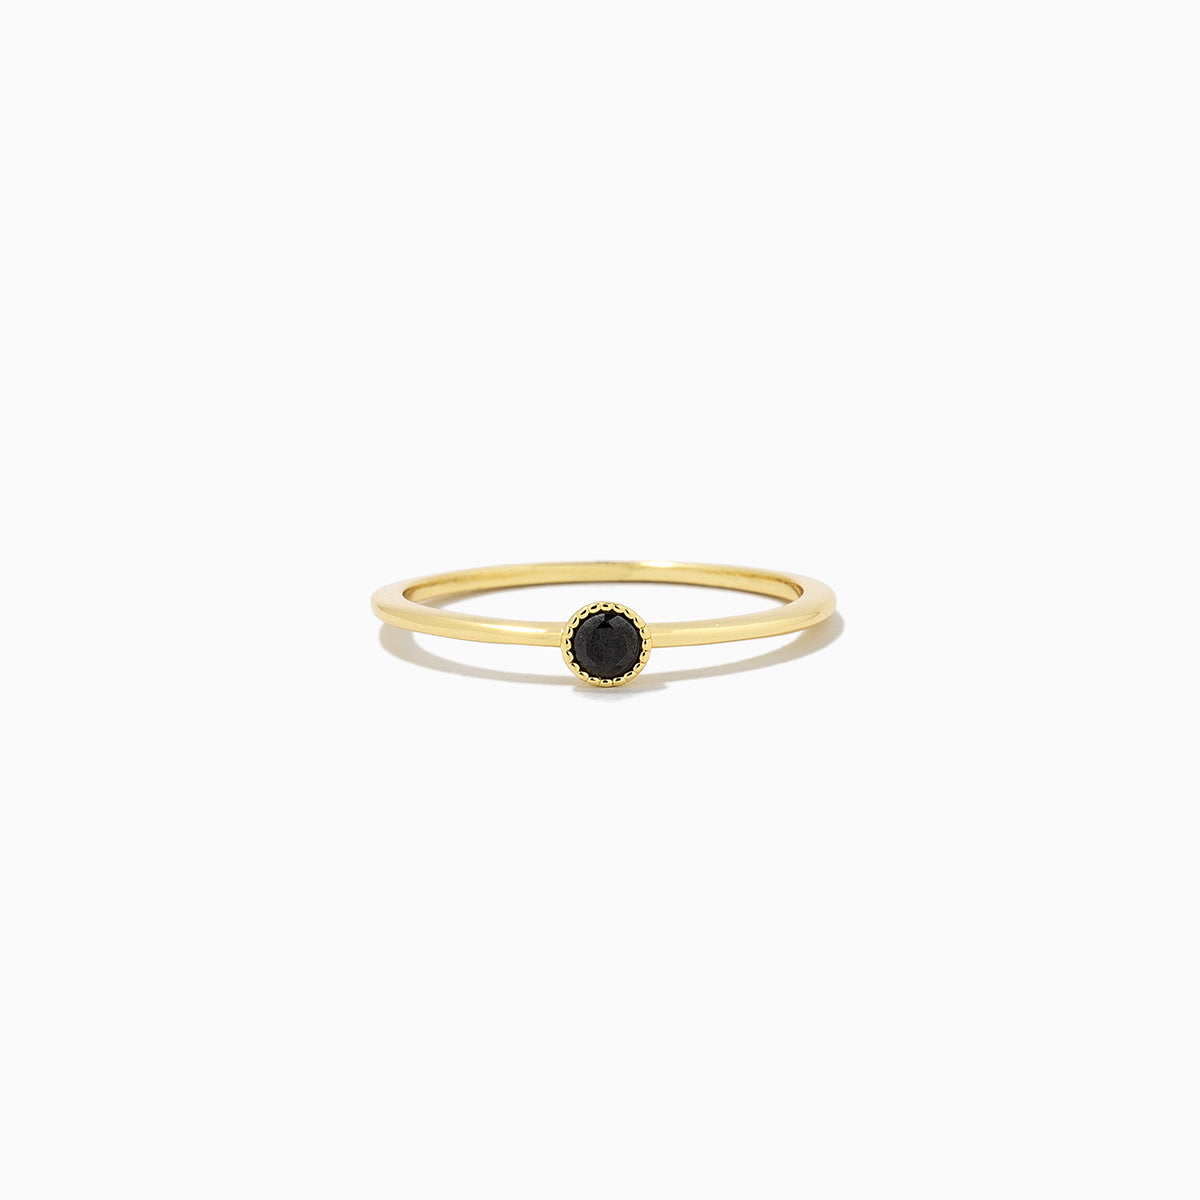 Full Moon Ring | Gold | Product Image | Uncommon James